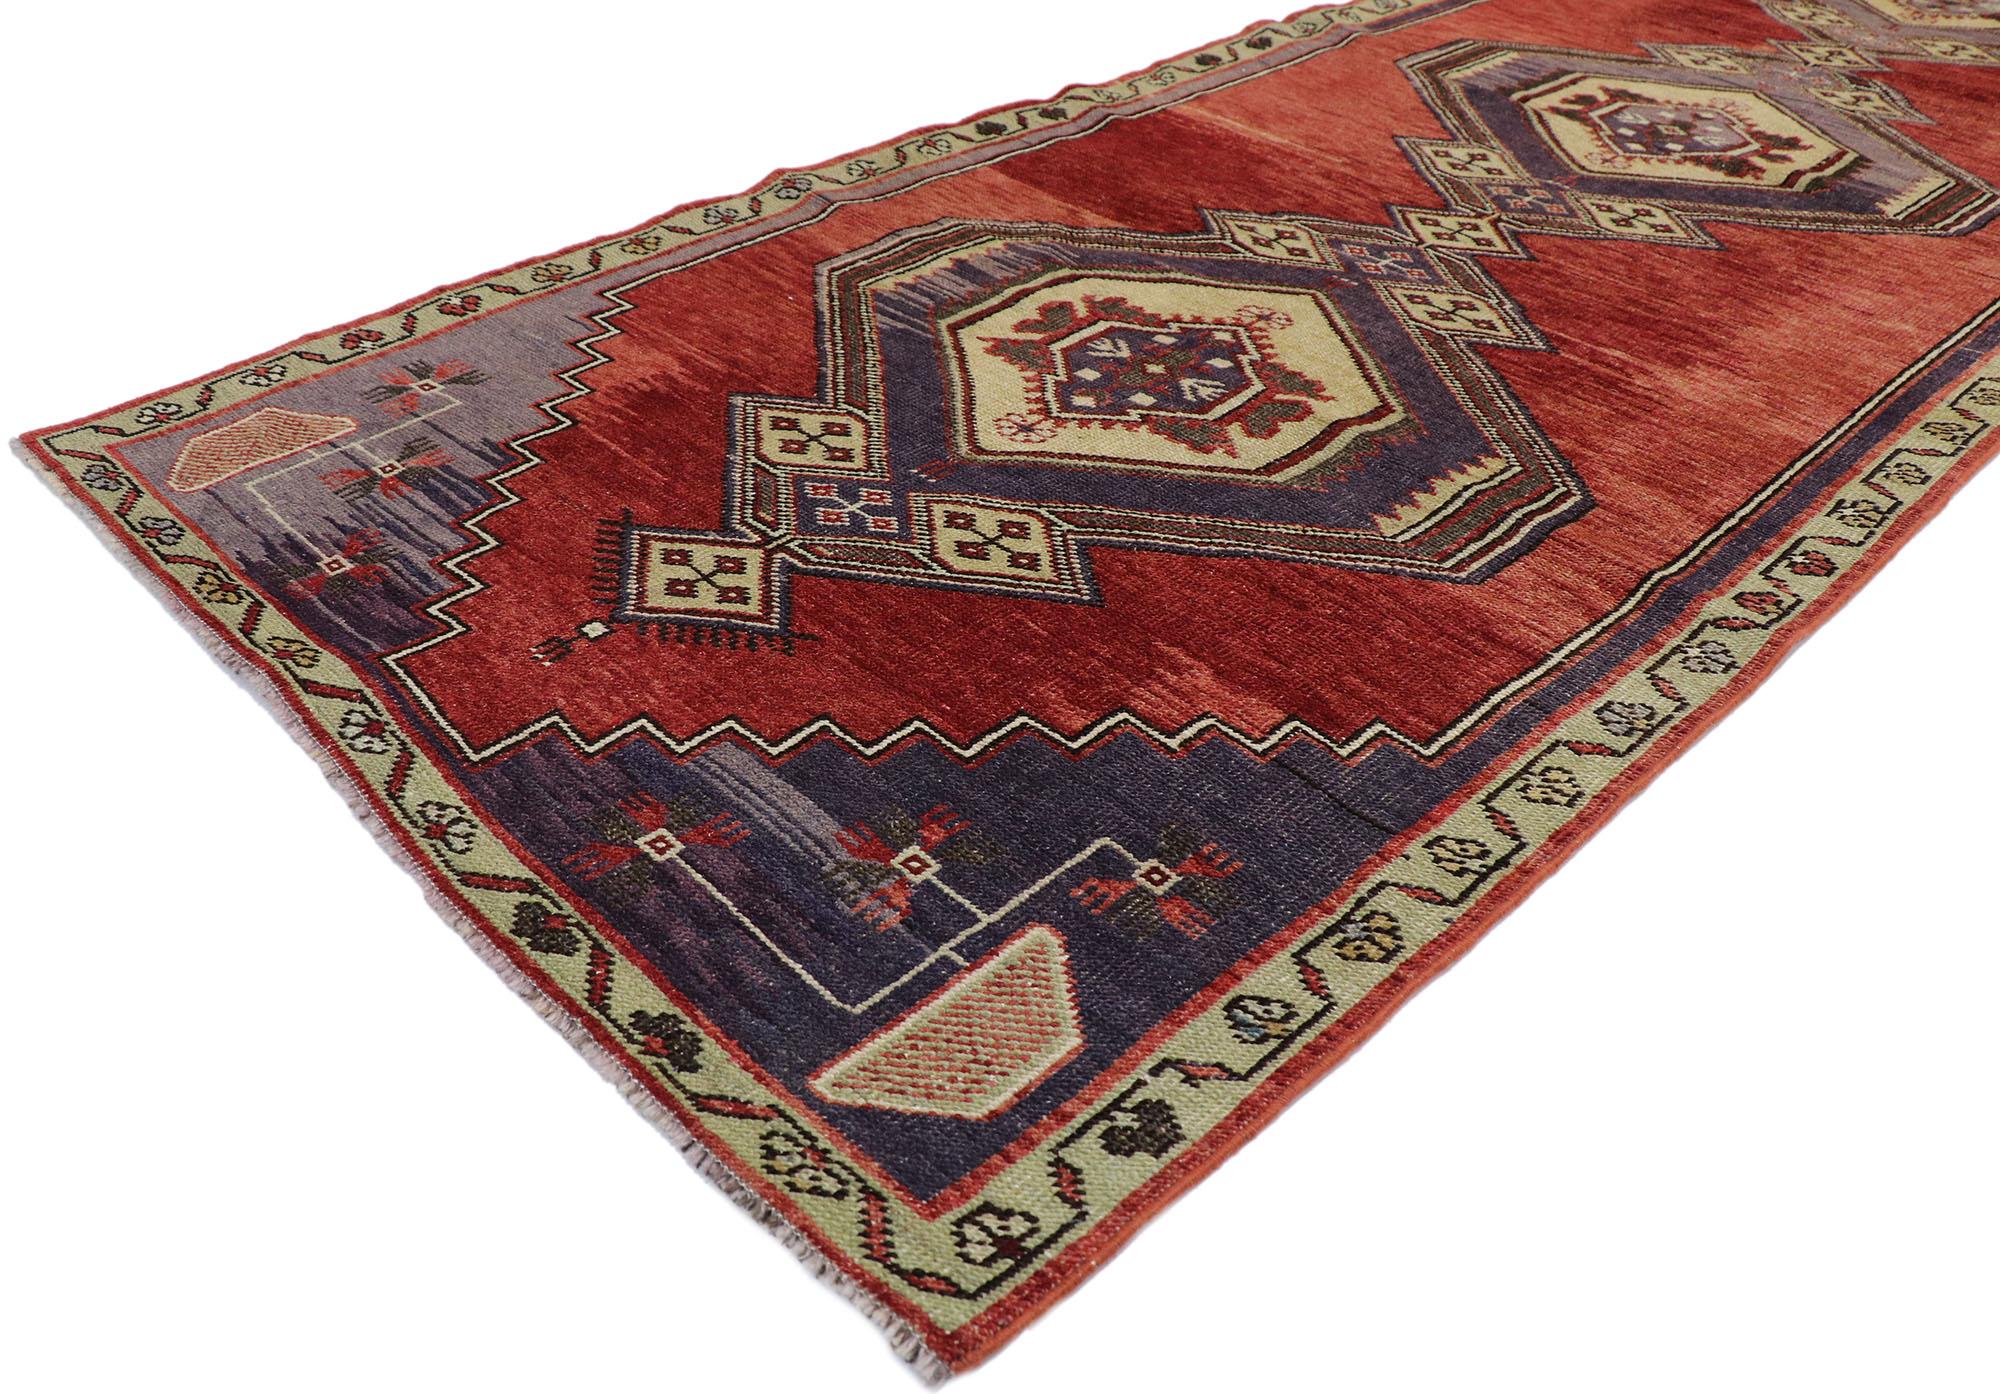 53521, vintage Turkish Oushak runner with Mid-Century Modern style 03'05 x 10'03. With its striking appeal and saturated red color palette, this hand-knotted wool vintage Turkish Oushak runner appears like a sumptuous Italian velvet, recalling the